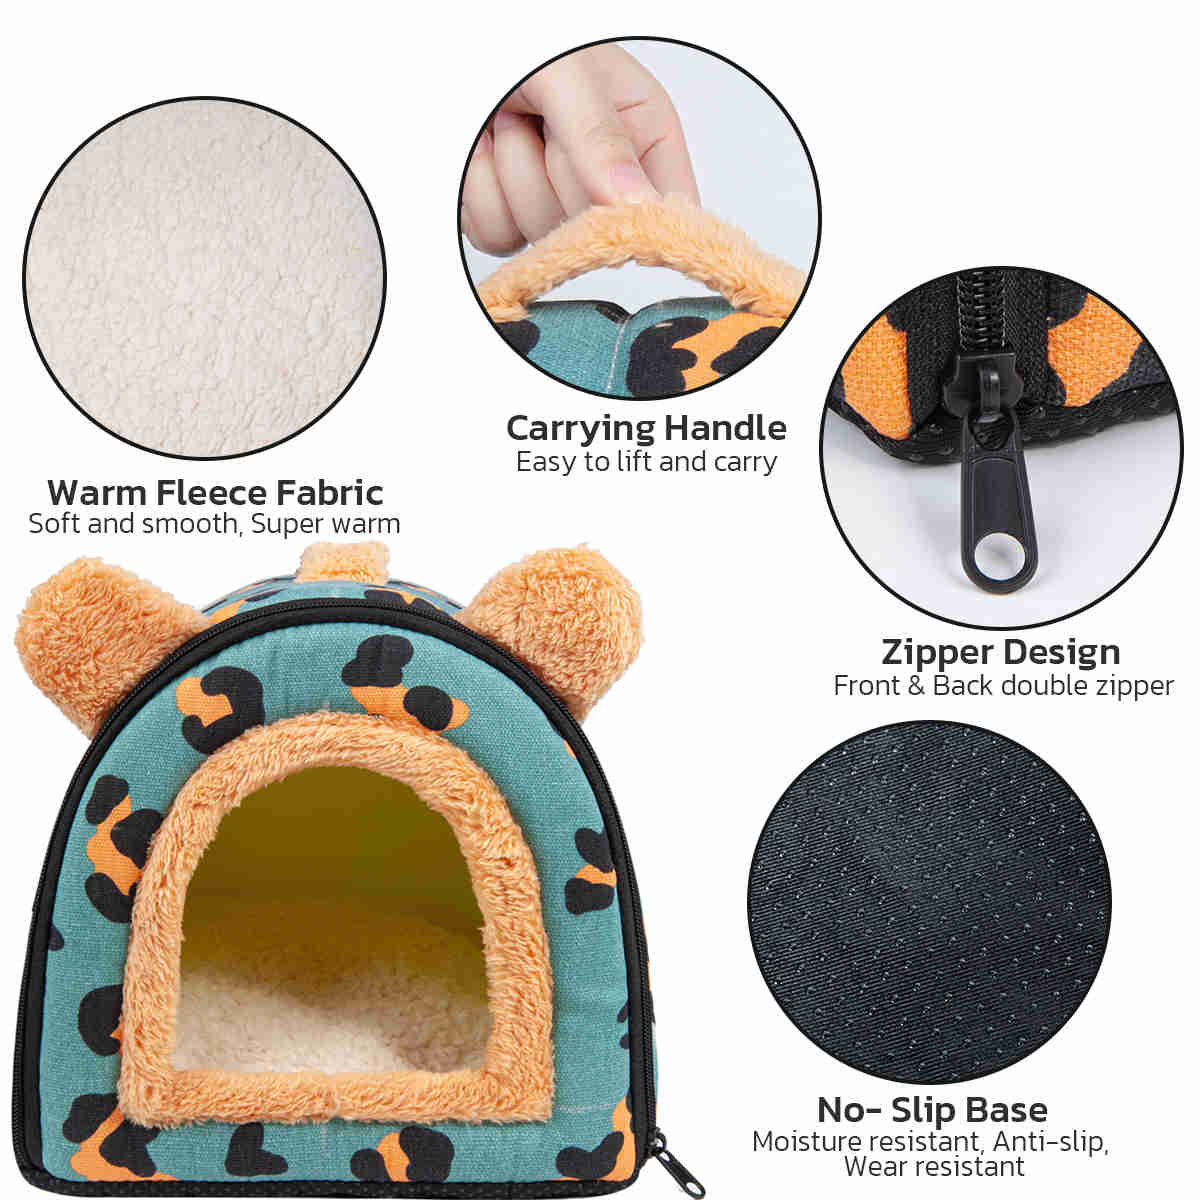 Guinea Pig Hideout，Bunny Bed, Small Animal Bed, Small Animal Bed, 1 Pack (Leopard Blue)